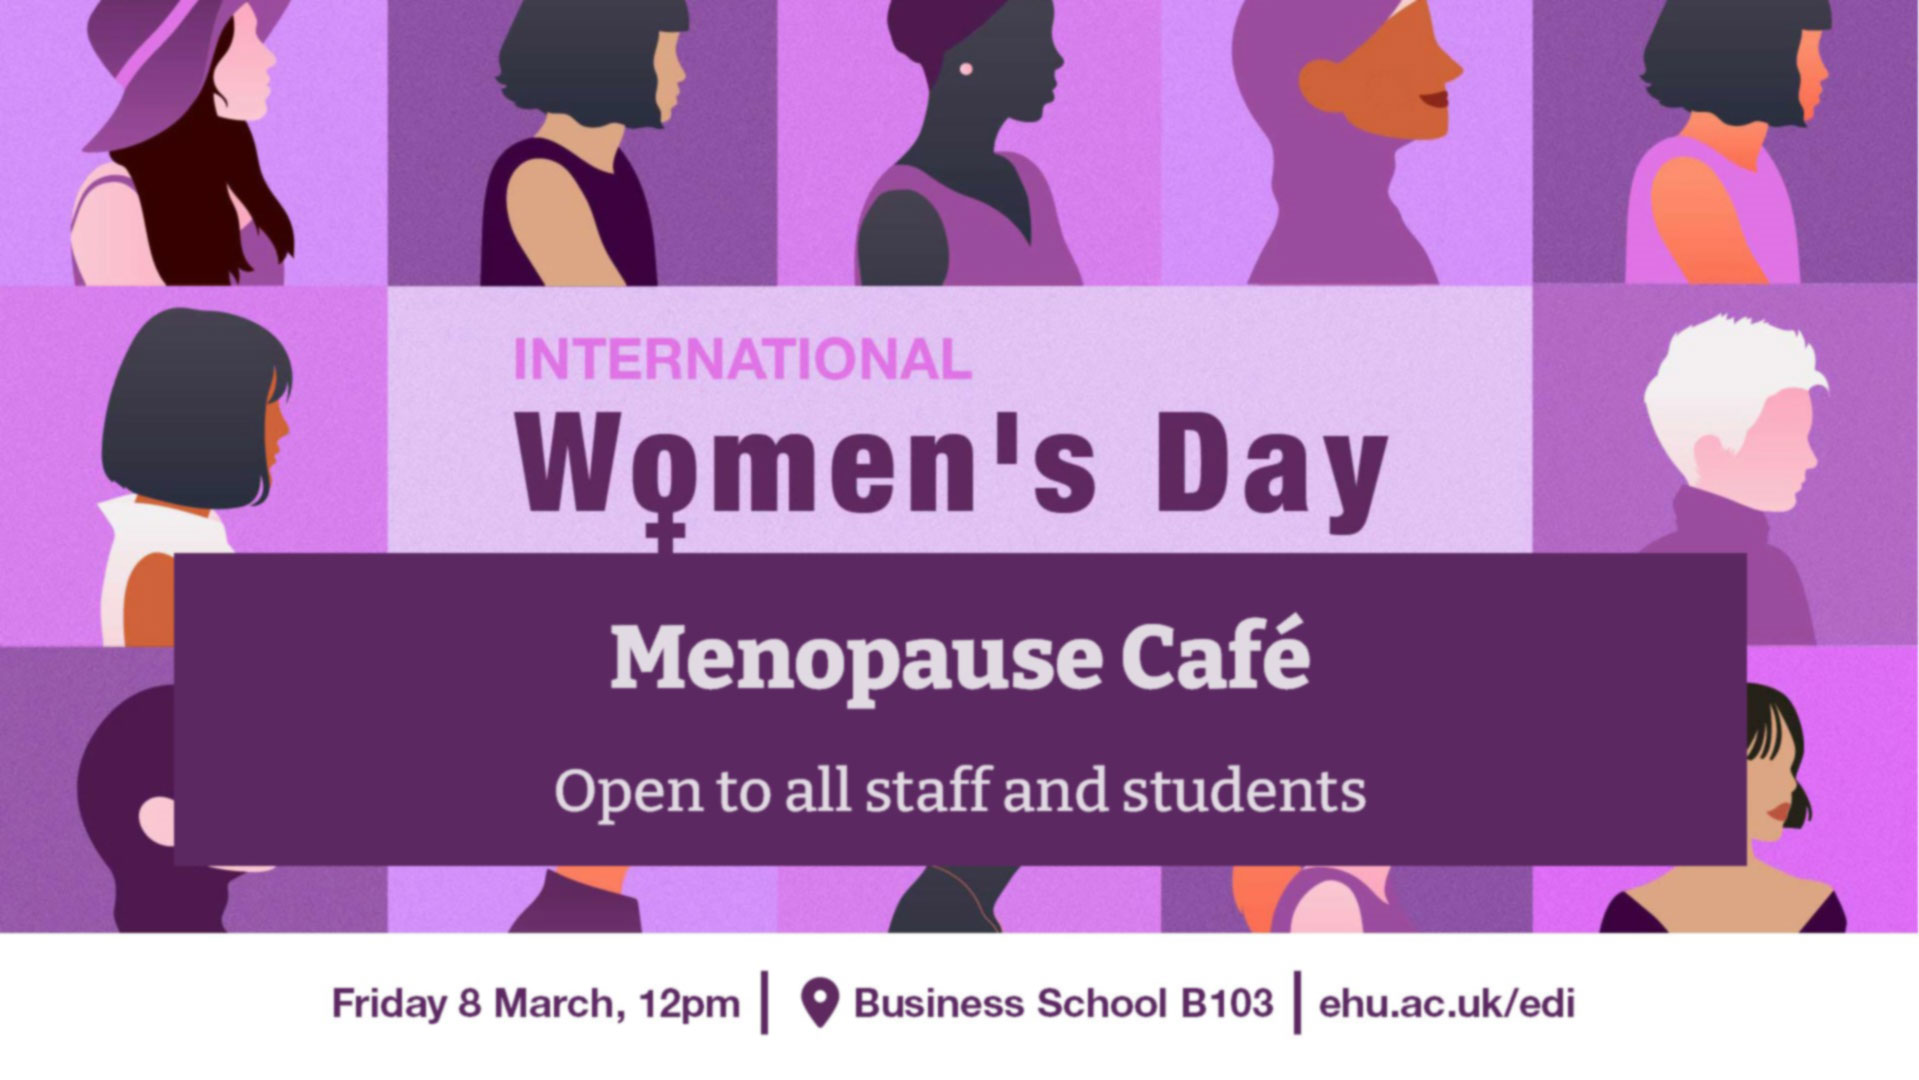 International Women's Day Menopause Cafe Open to all staff and students Friday 8 March, 12pm Business School B103 ehu.ac.uk/edi